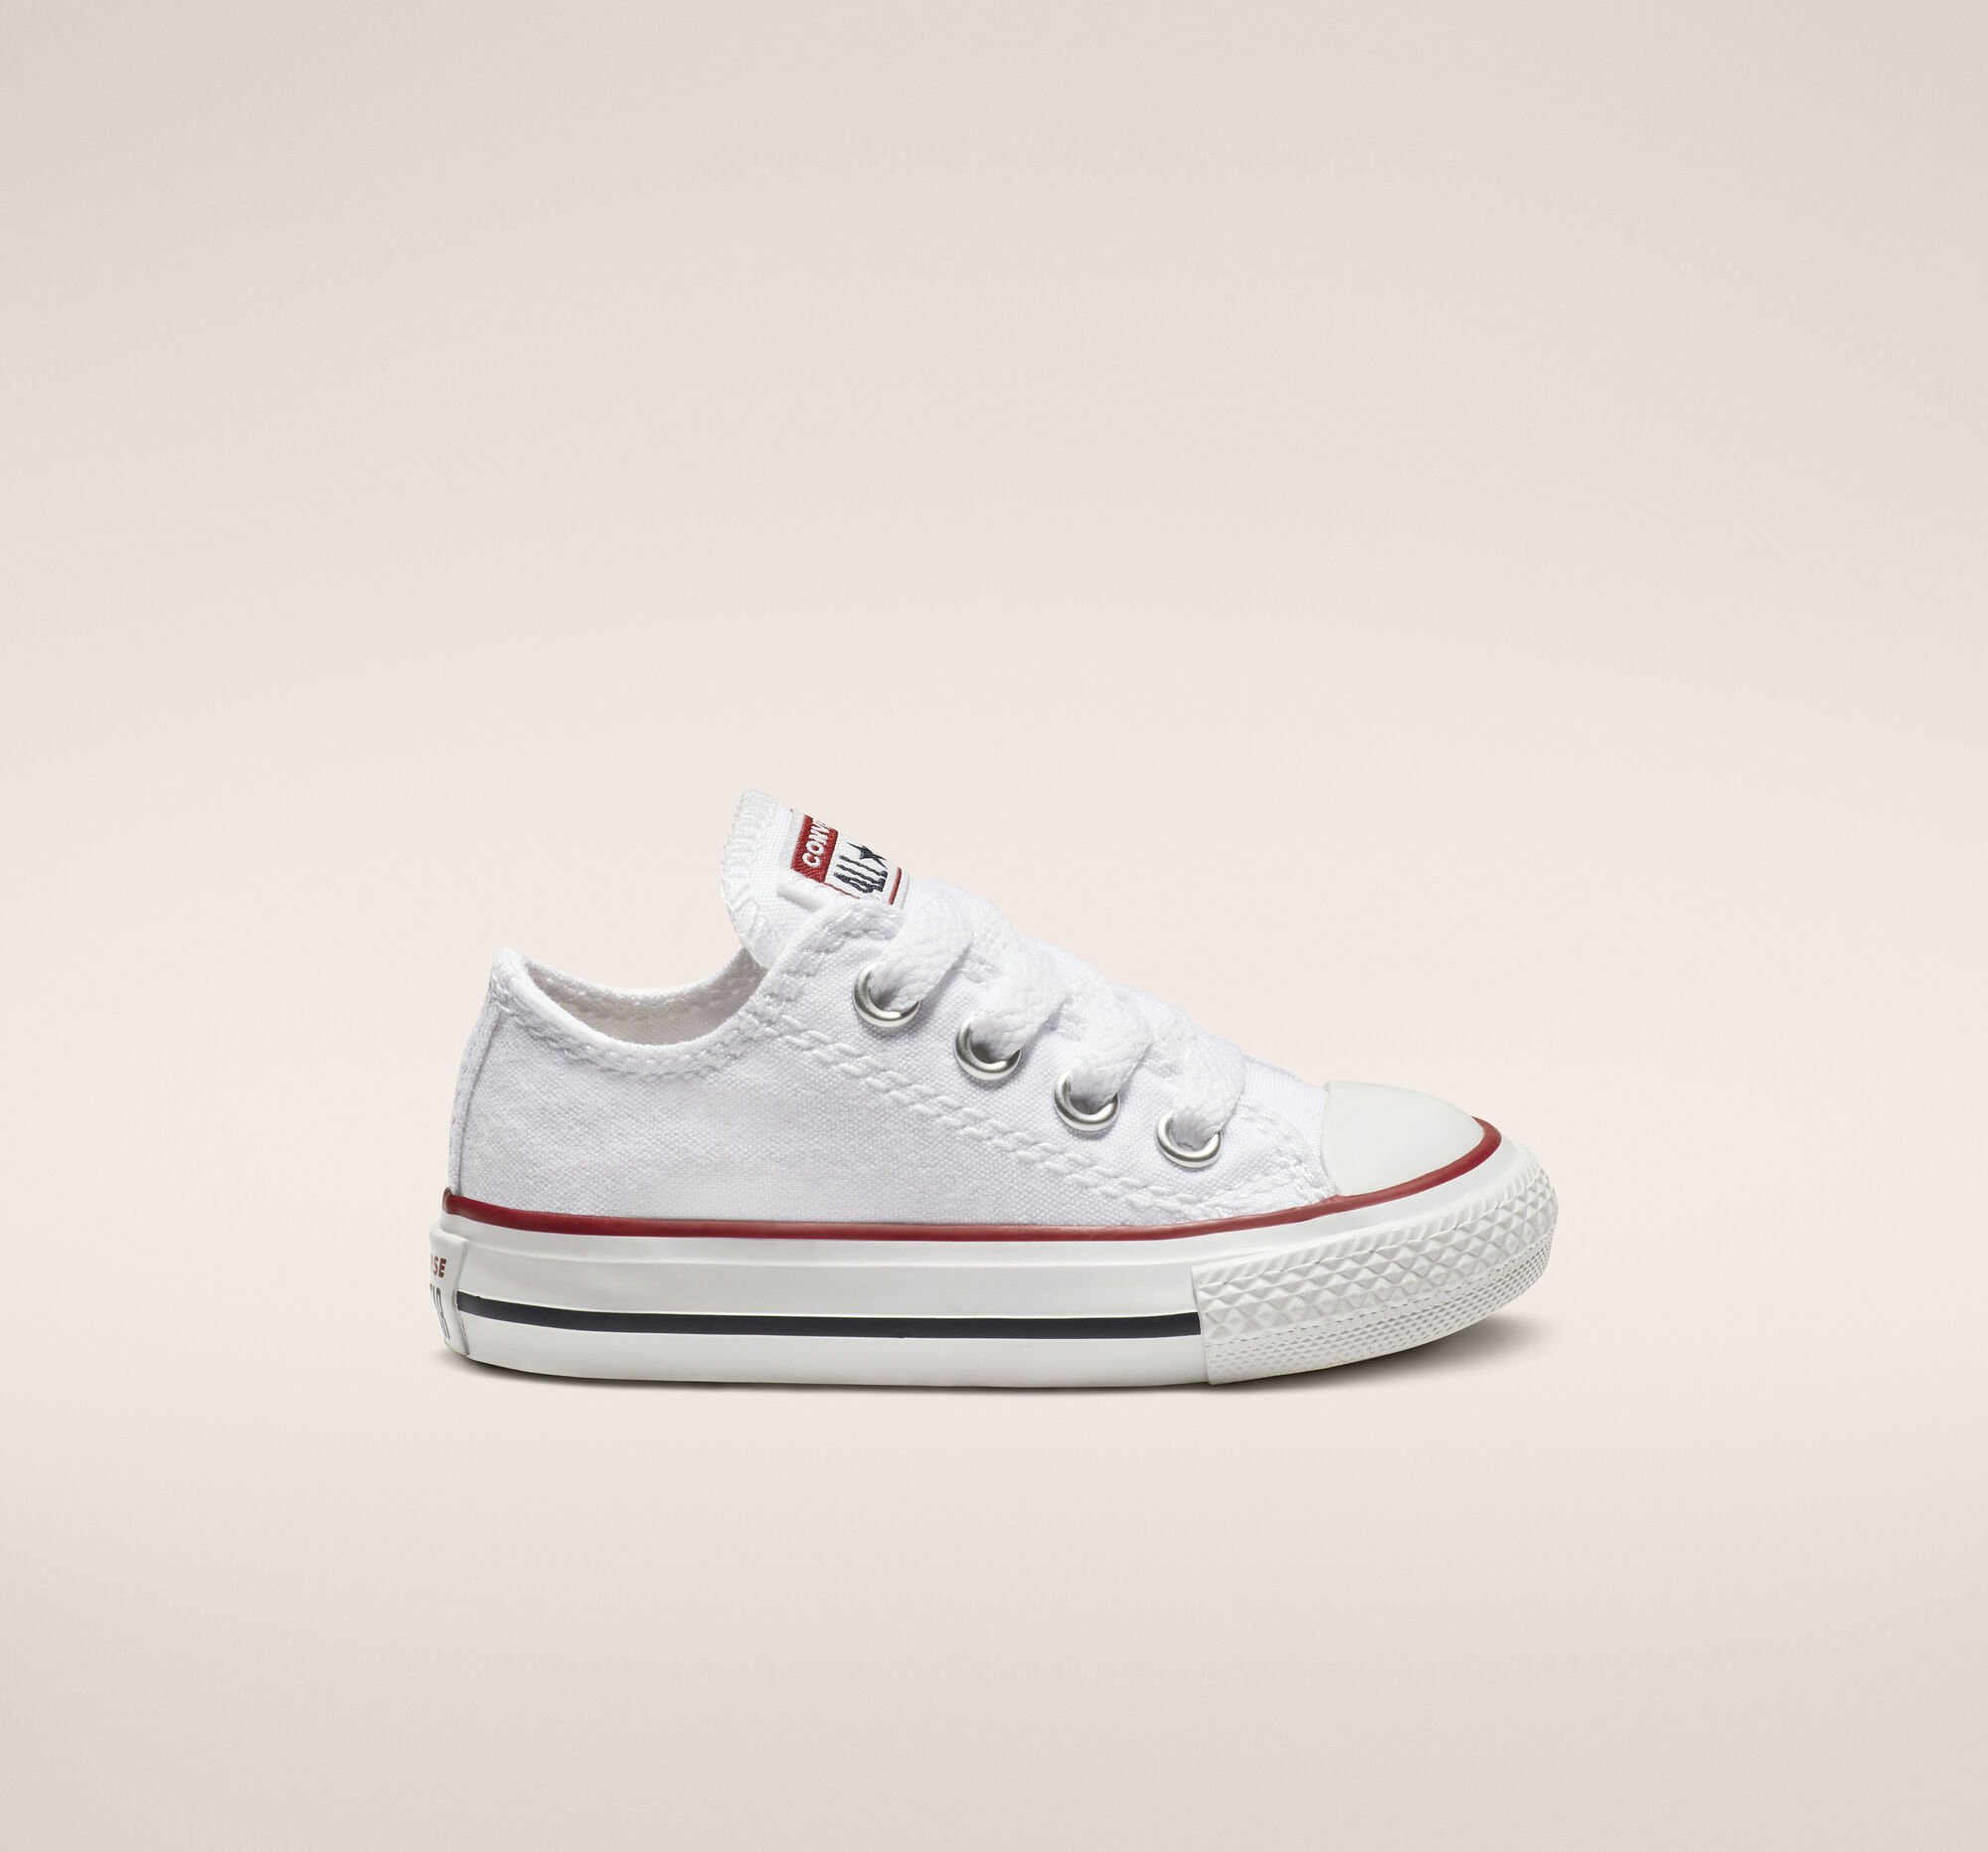 Converse Chuck Taylor All Star Classic Todder Low Top Shoes in Optical White.jpg